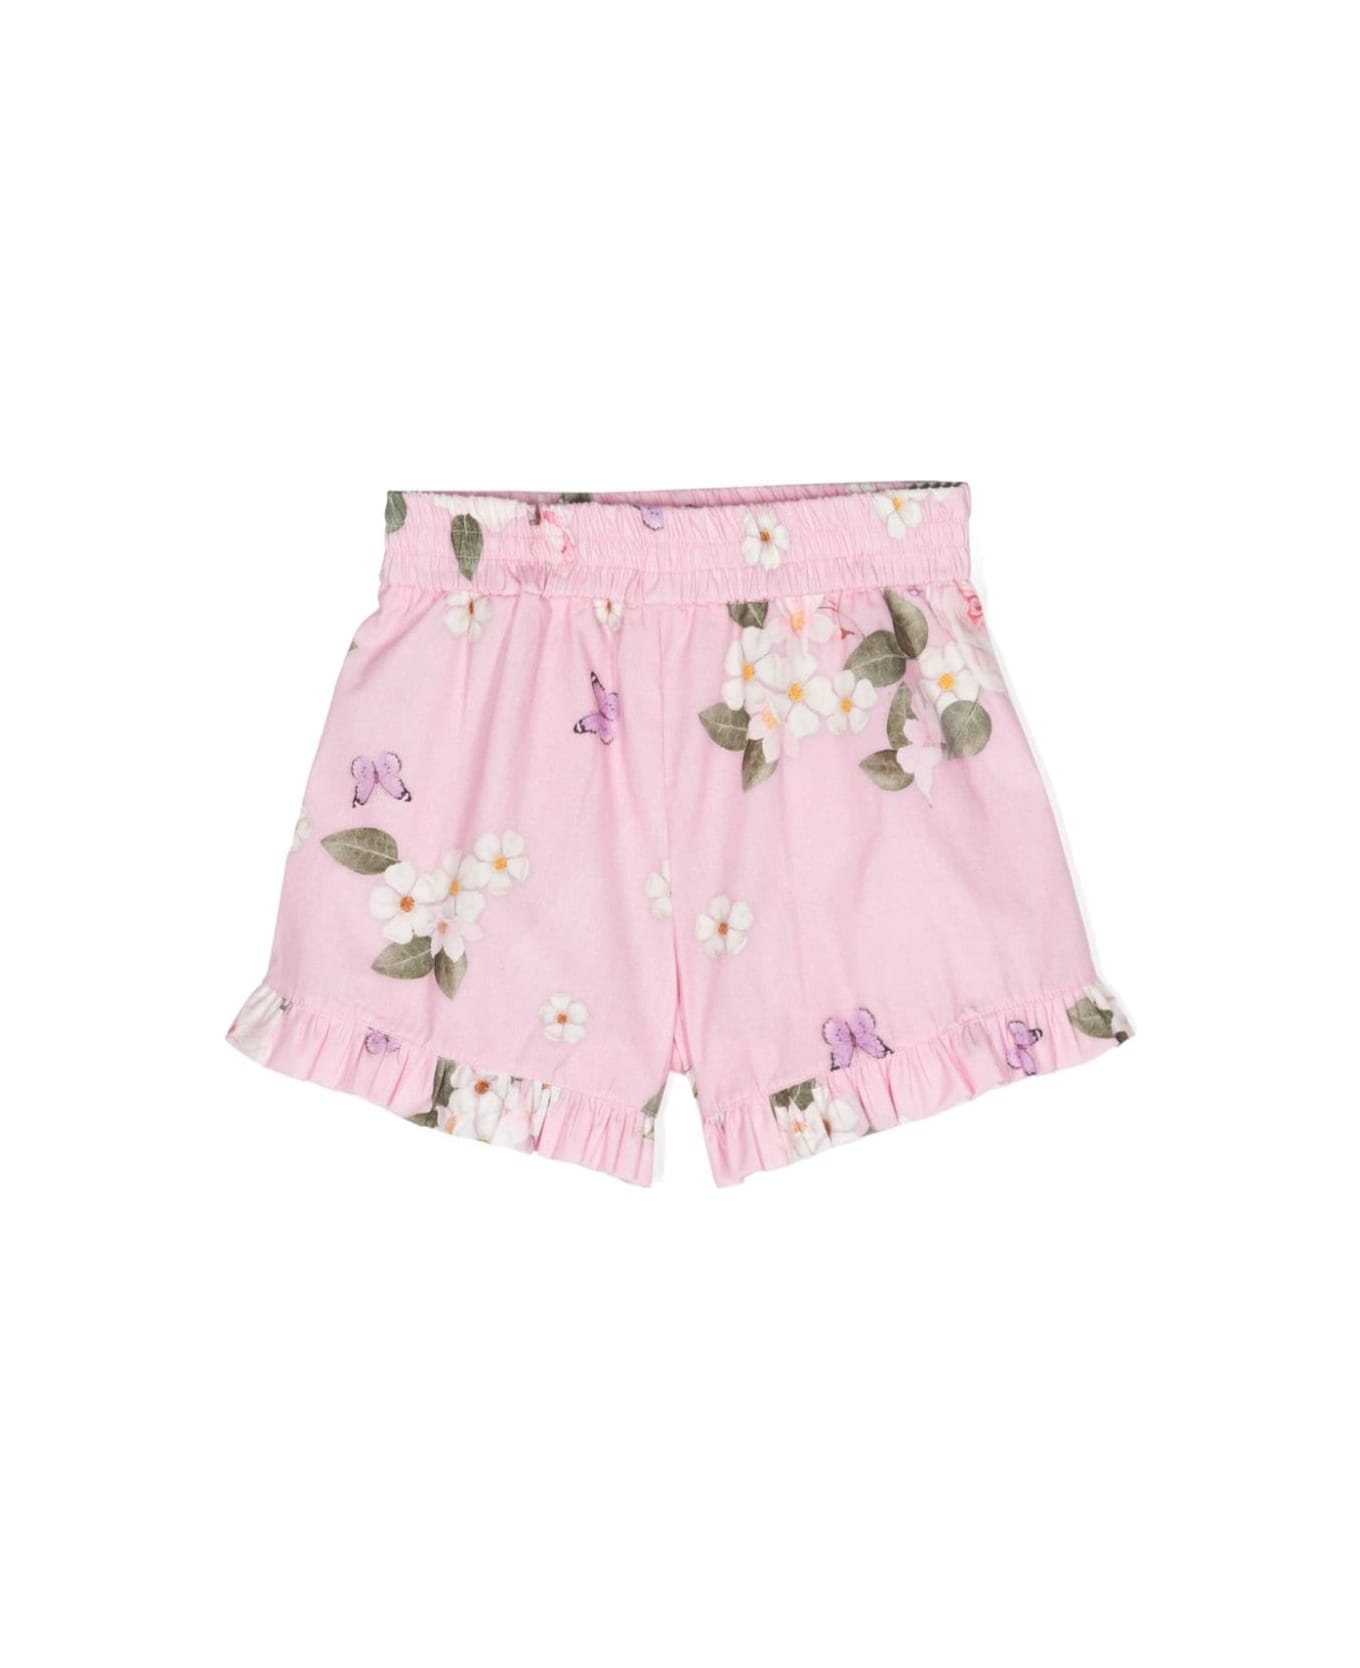 Monnalisa Pink Shorts With Floreal Print And Ruffles In Cotton Girl - Pink ボトムス